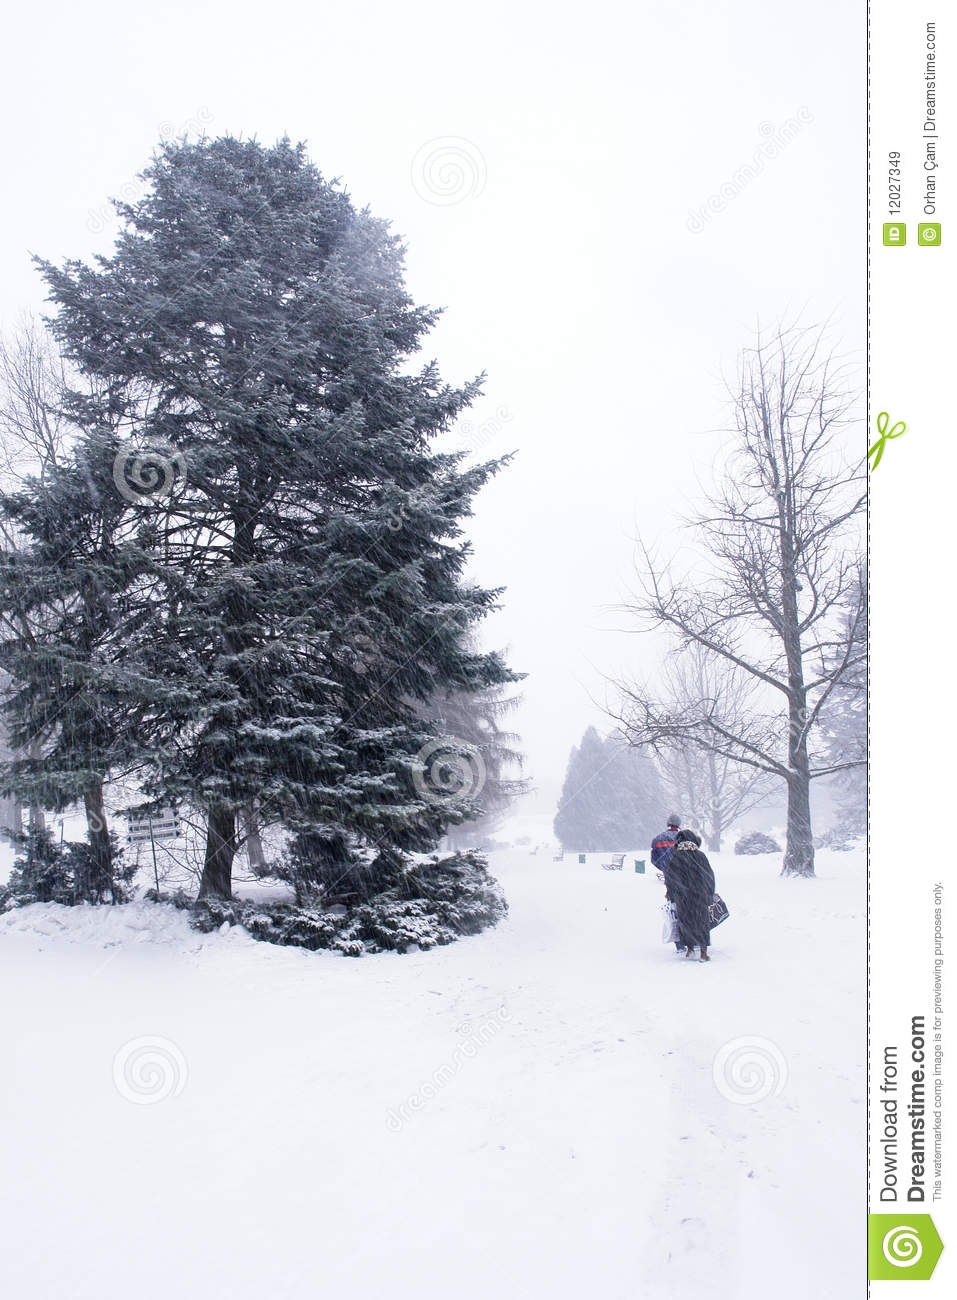 Walking In Heavy Snow Royalty Free Stock Images   Image  12027349